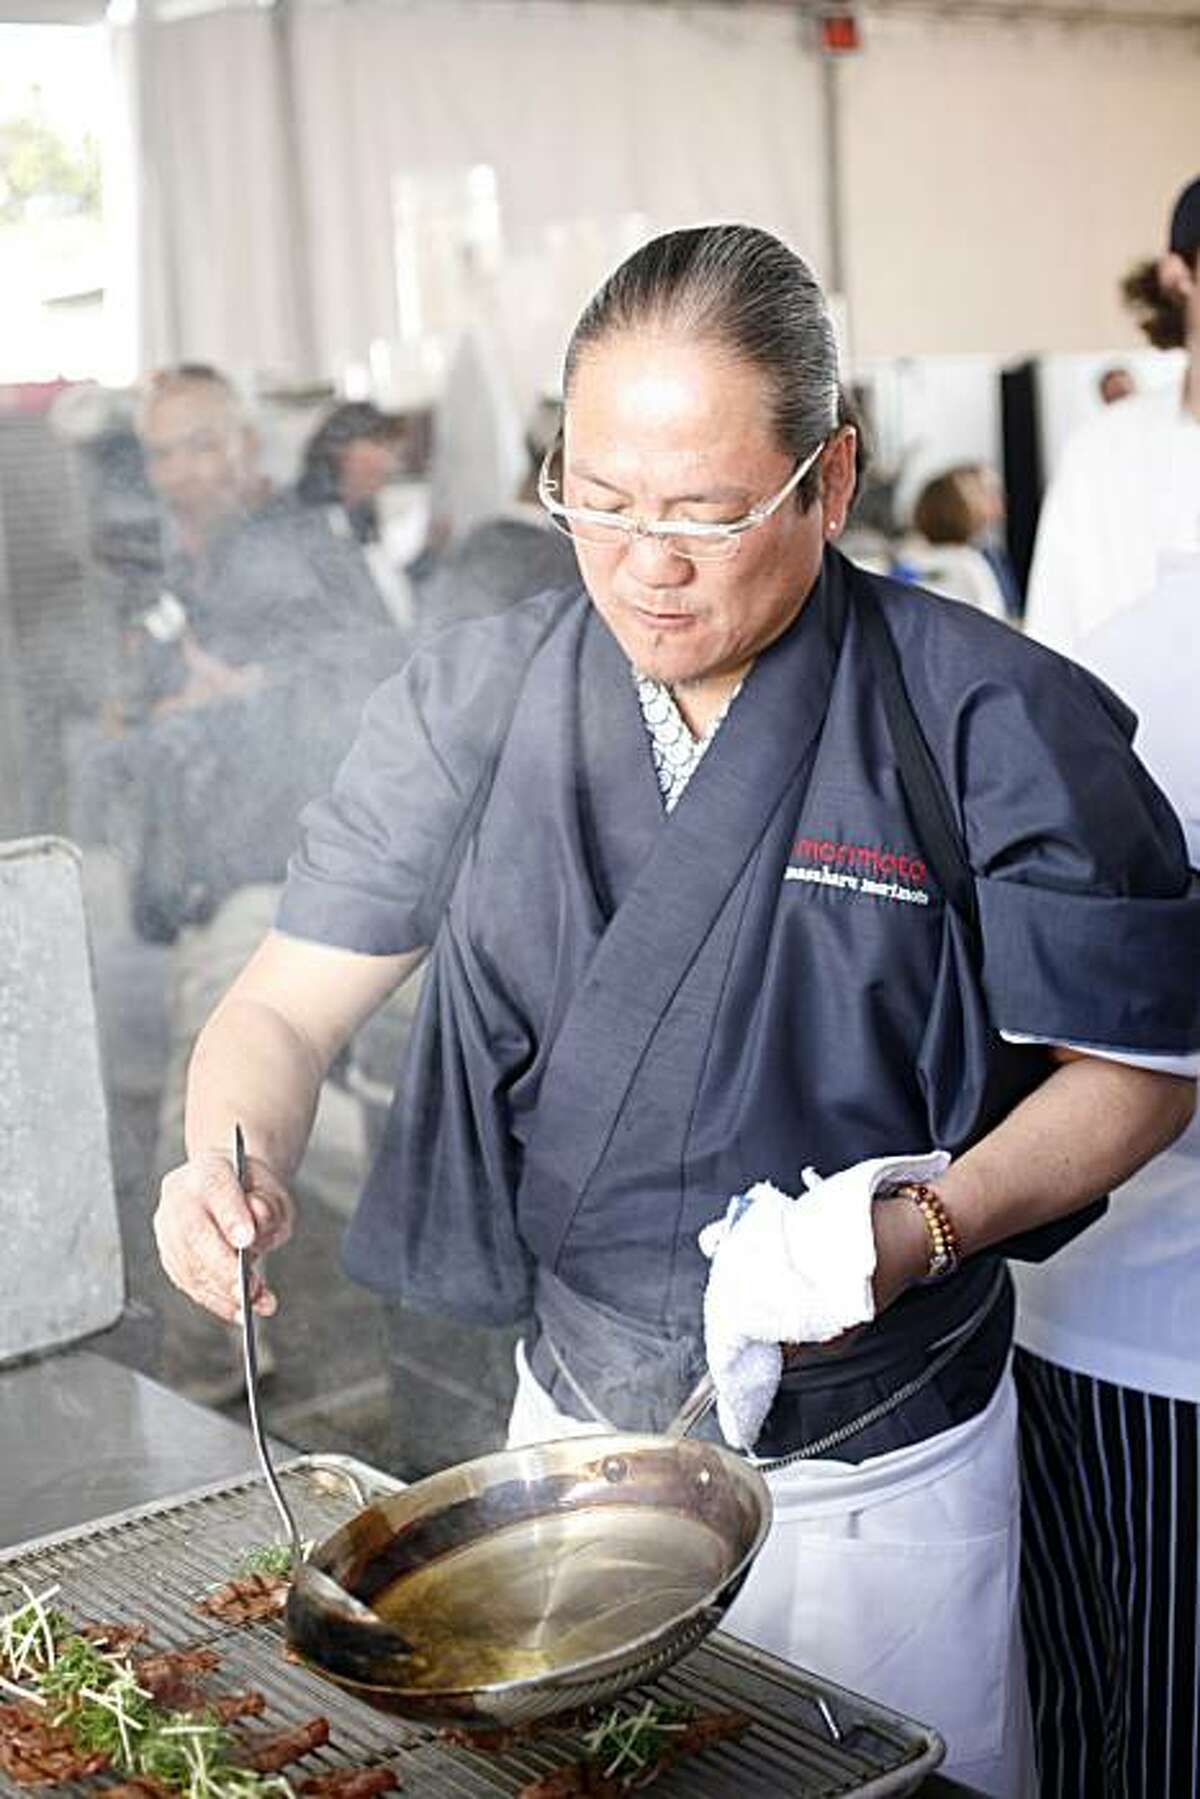 Star of the Iron Chef TV show, Masaharu Morimoto, preparing his dish of Kobe beef with congee for lunch during the first annual Pebble Beach Food and Wine festival at Pebble Beach, Calif., on March 28, 2008. Photo by Craig Lee / The San Francisco Chronicle